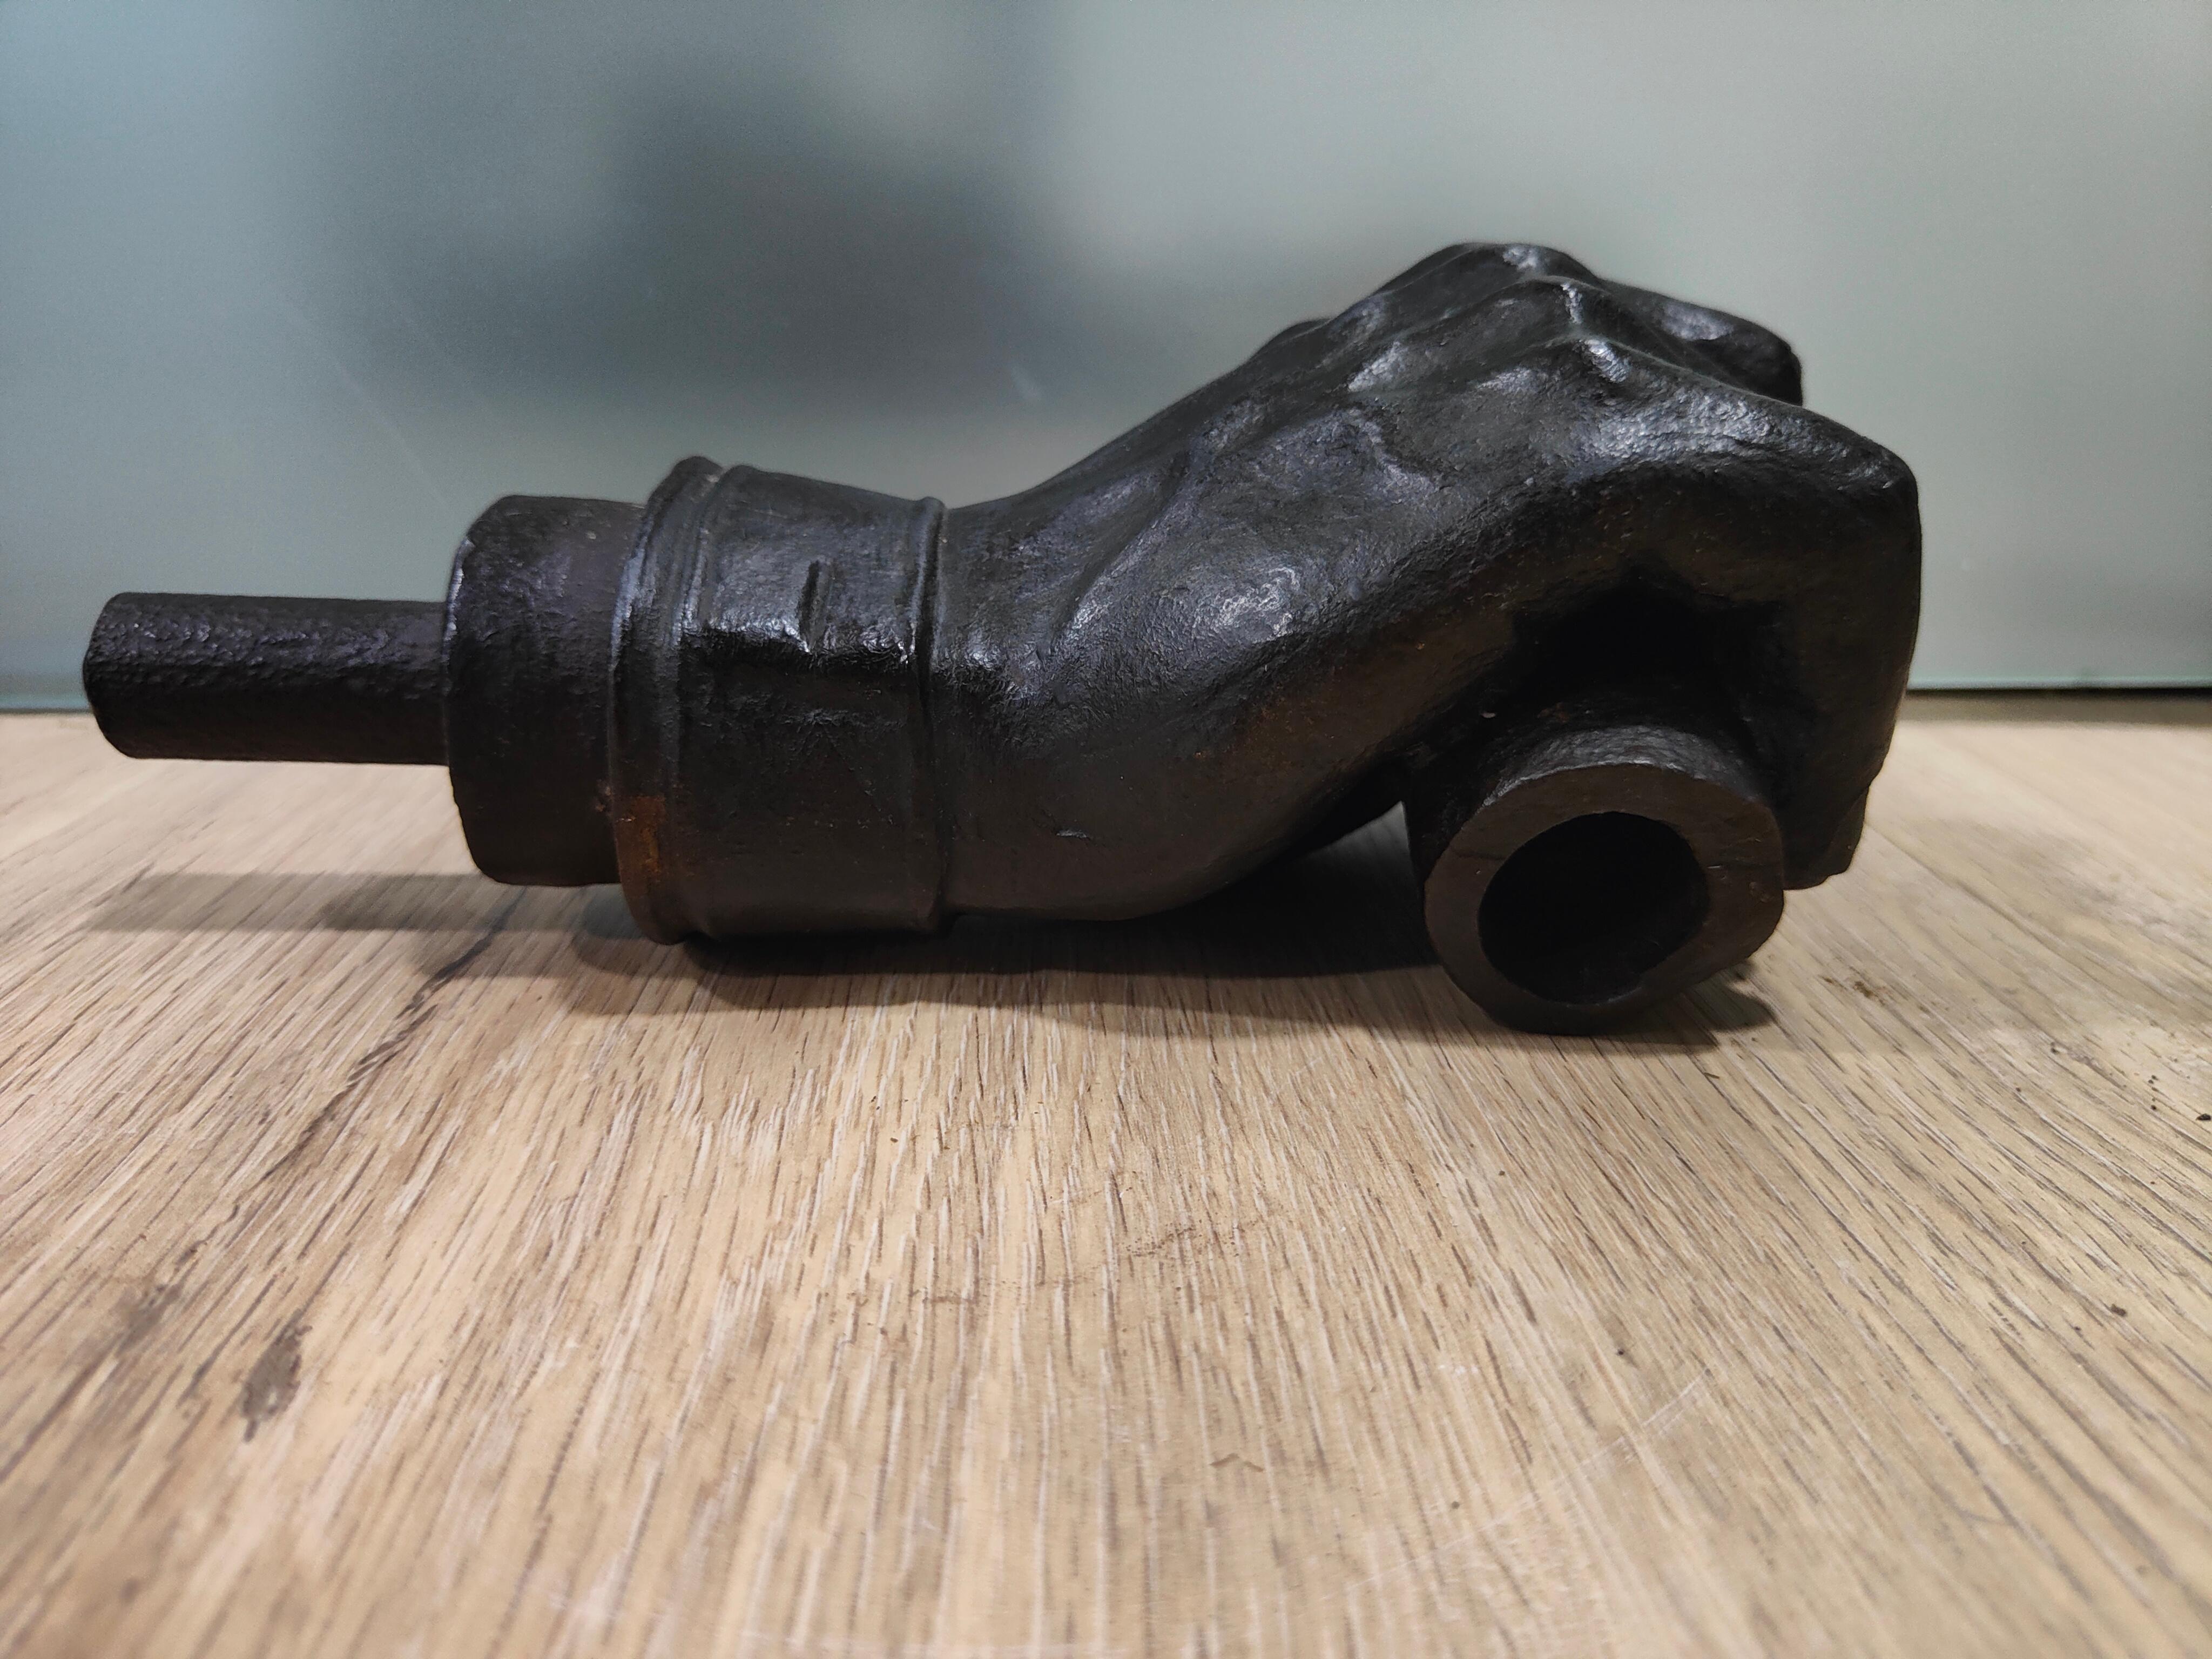 Forged Iron Hand Sculpture - Elegant Artisan-Crafted Piece at the Forge by a Mas For Sale 6